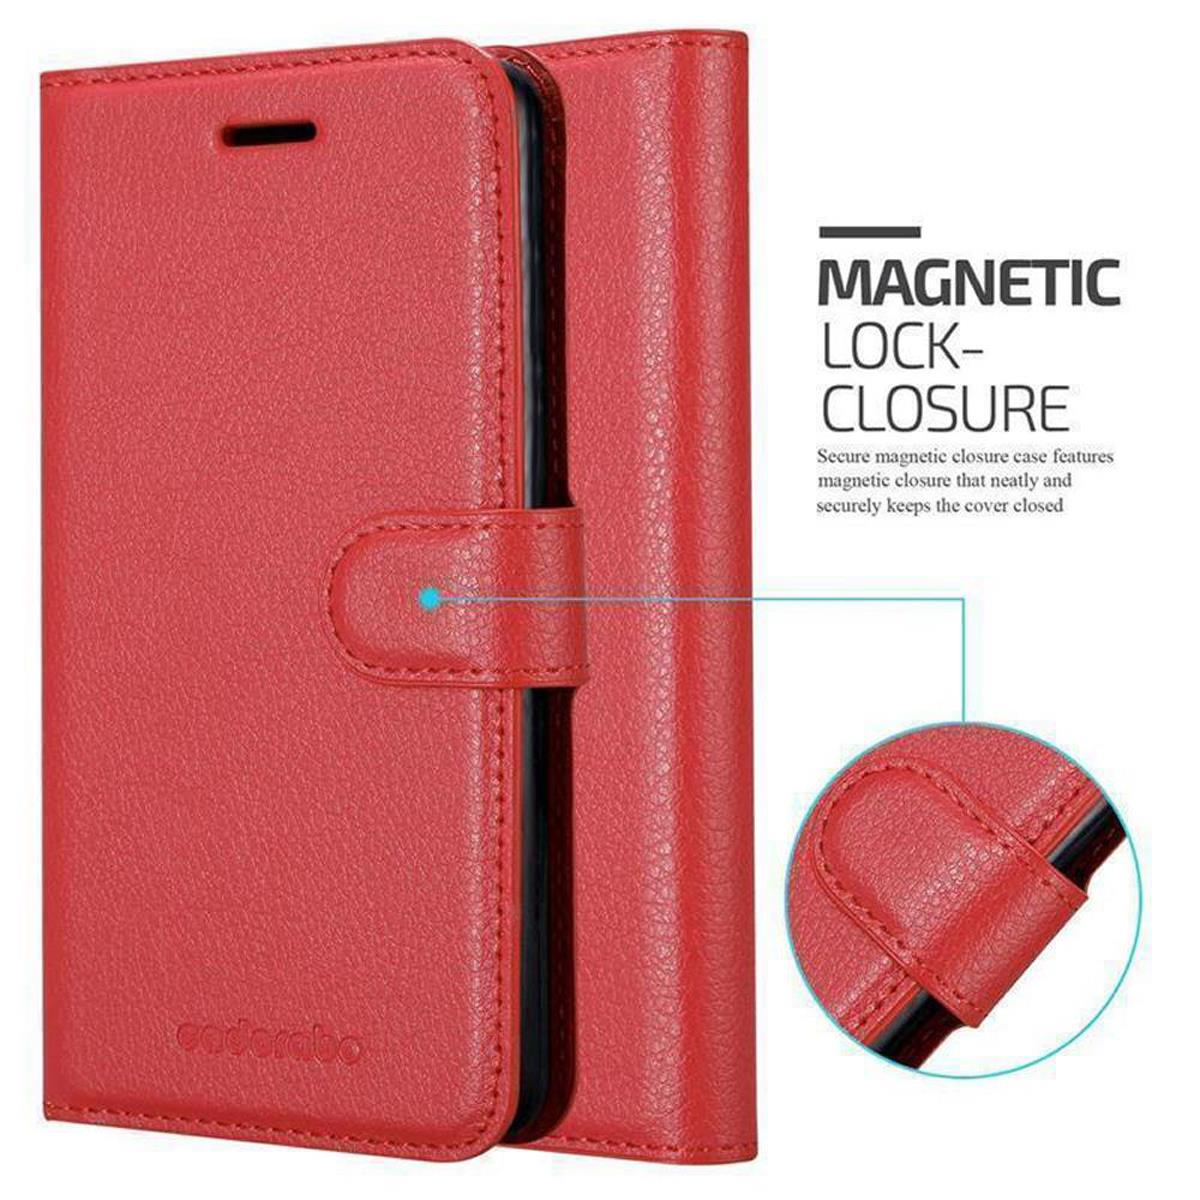 Huawei, KARMIN Book Standfunktion, ROT MATE Hülle Bookcover, 30, CADORABO